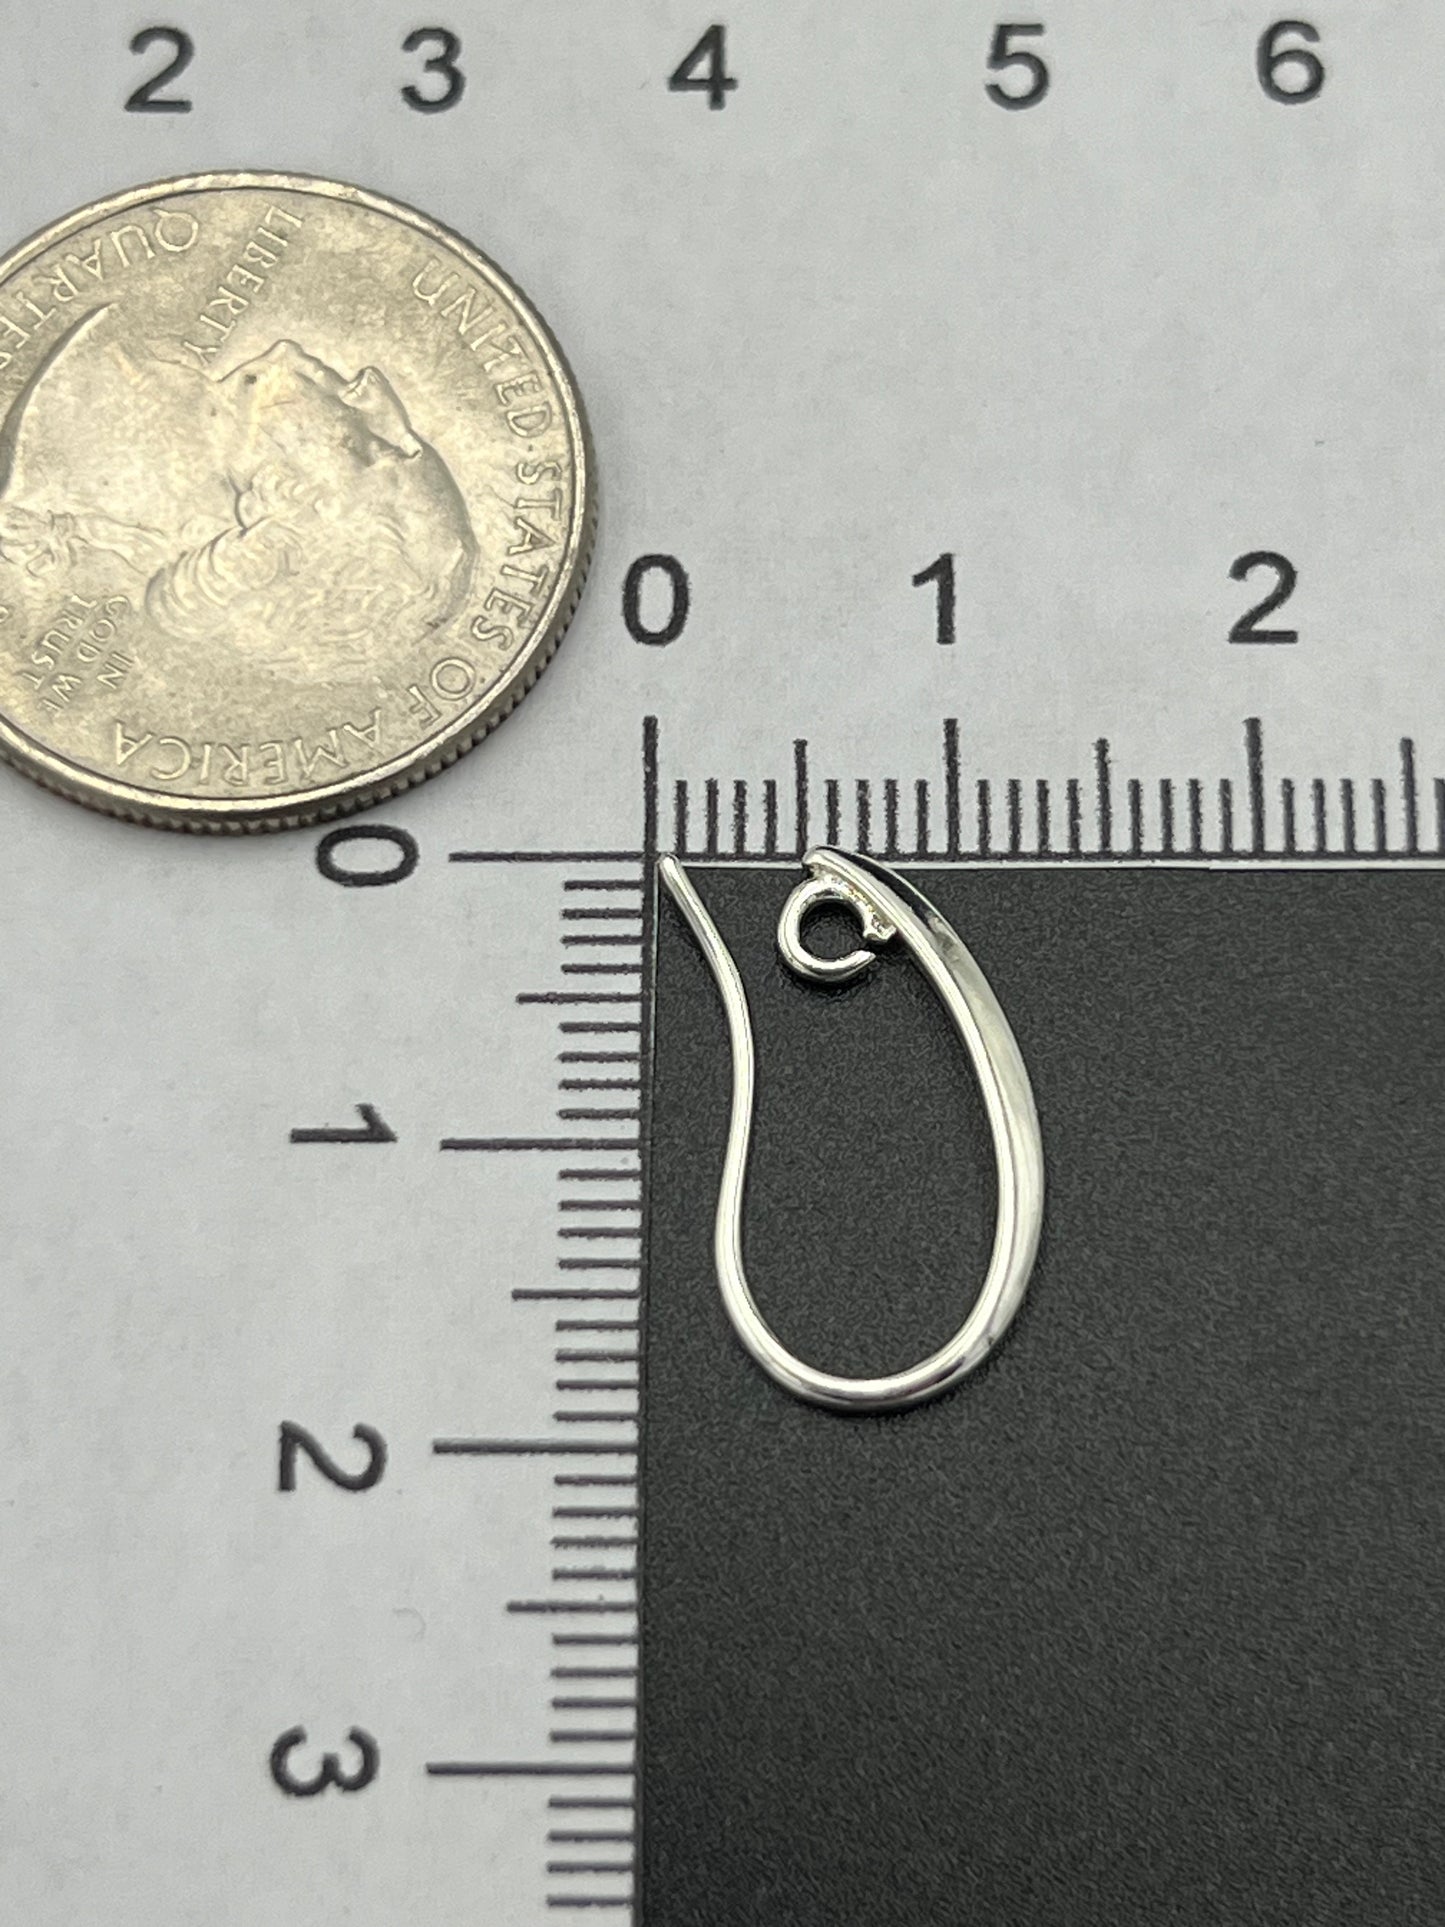 19x11mm Silver Plated Earwire with 2mm Open Ring 36 Pack